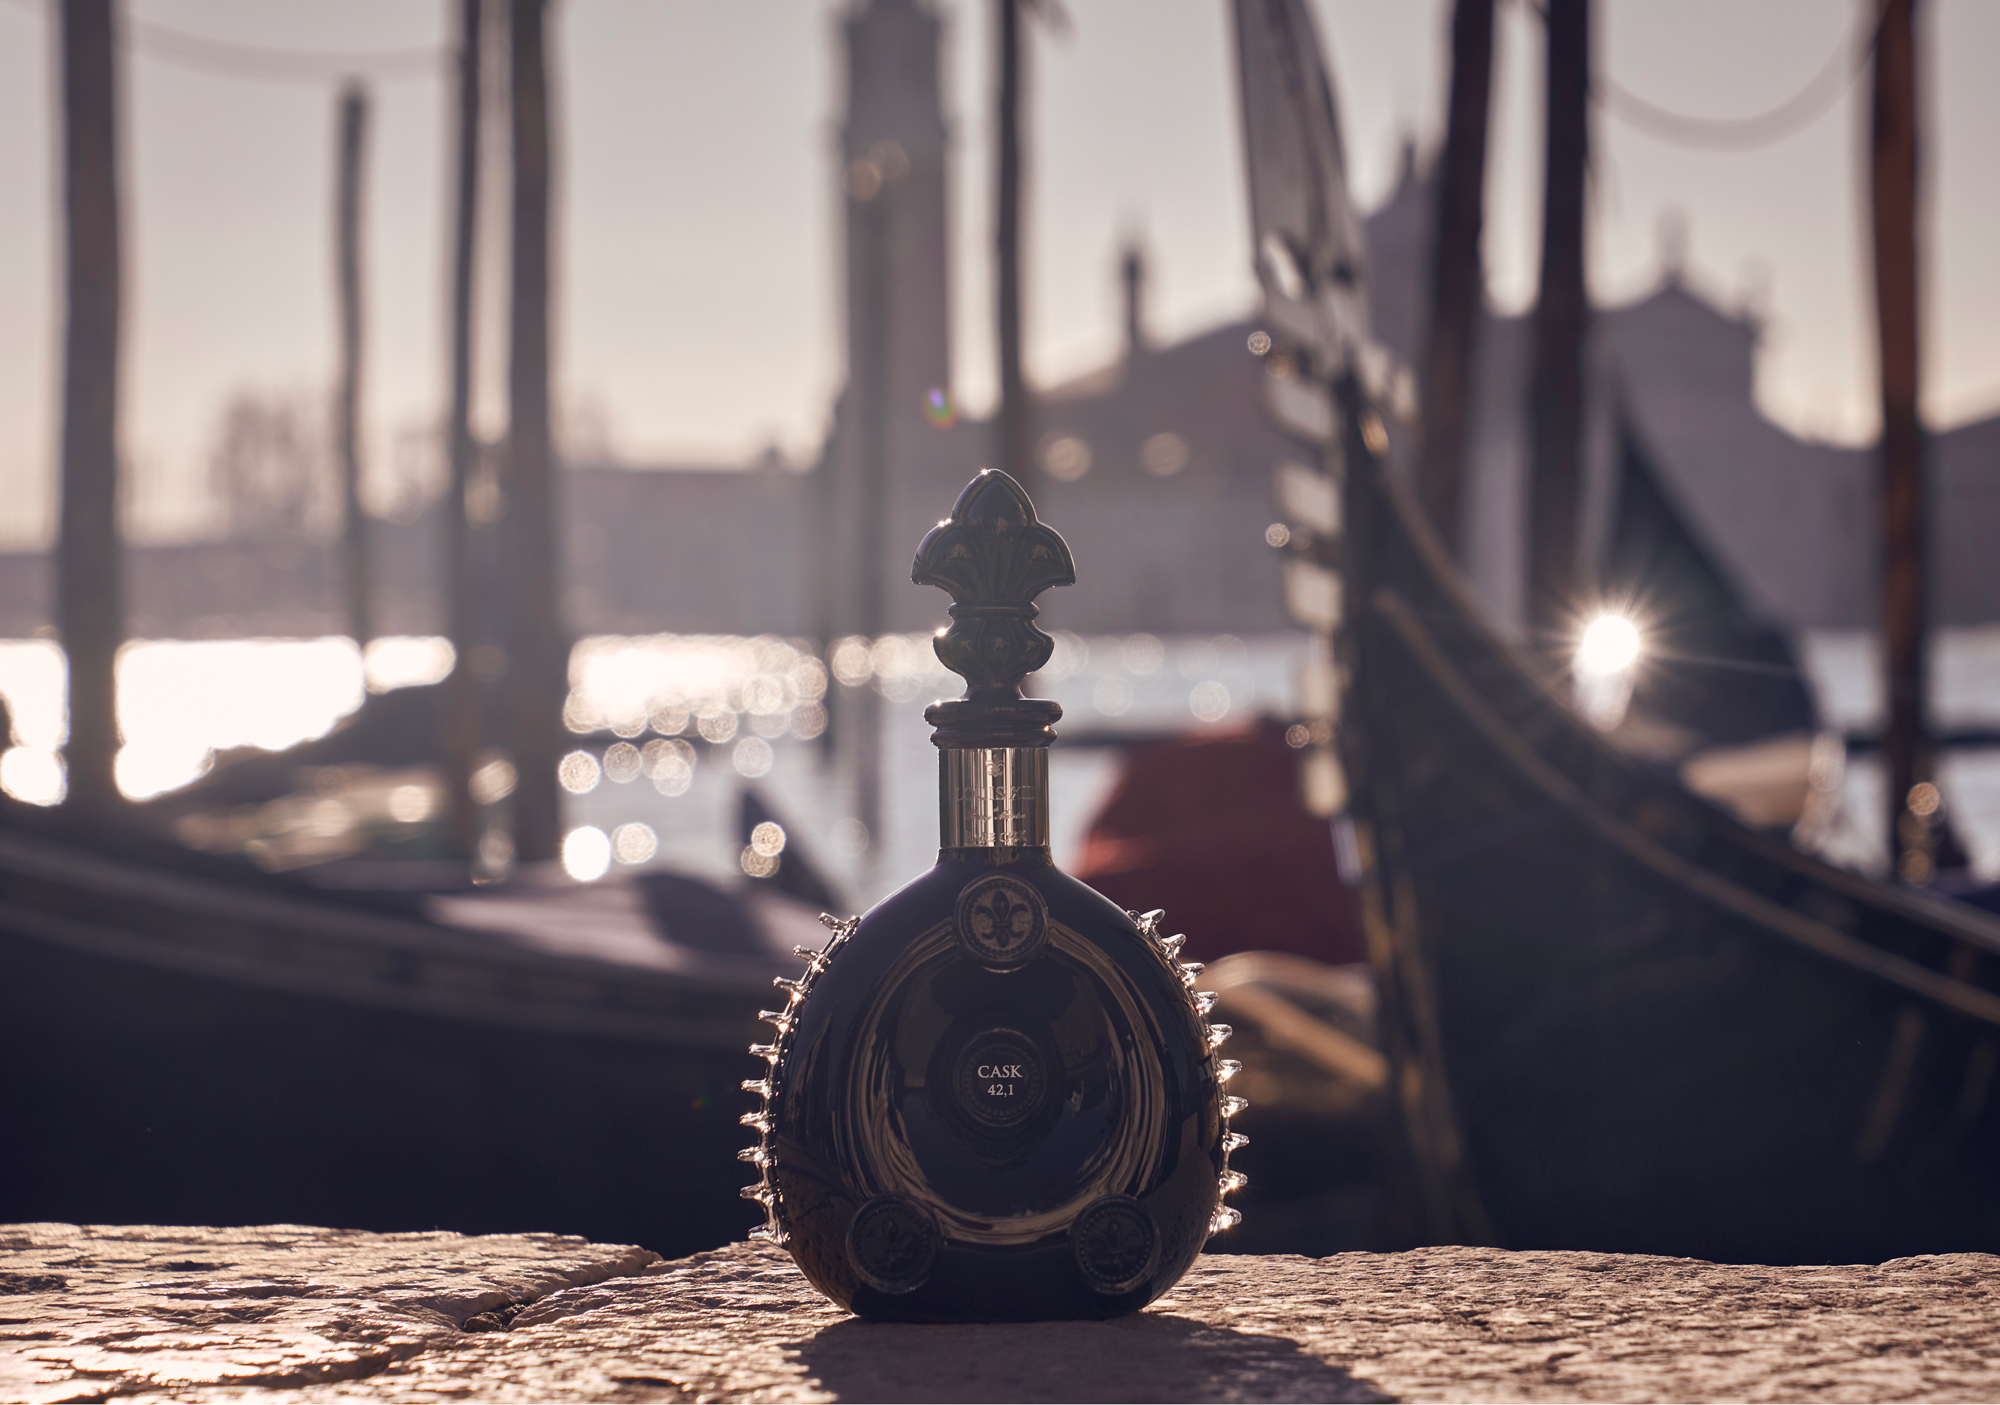 Louis III Rare Cask 42.1 cognac black in a Baccarat decanter on side of dock in Venice with boats in the background